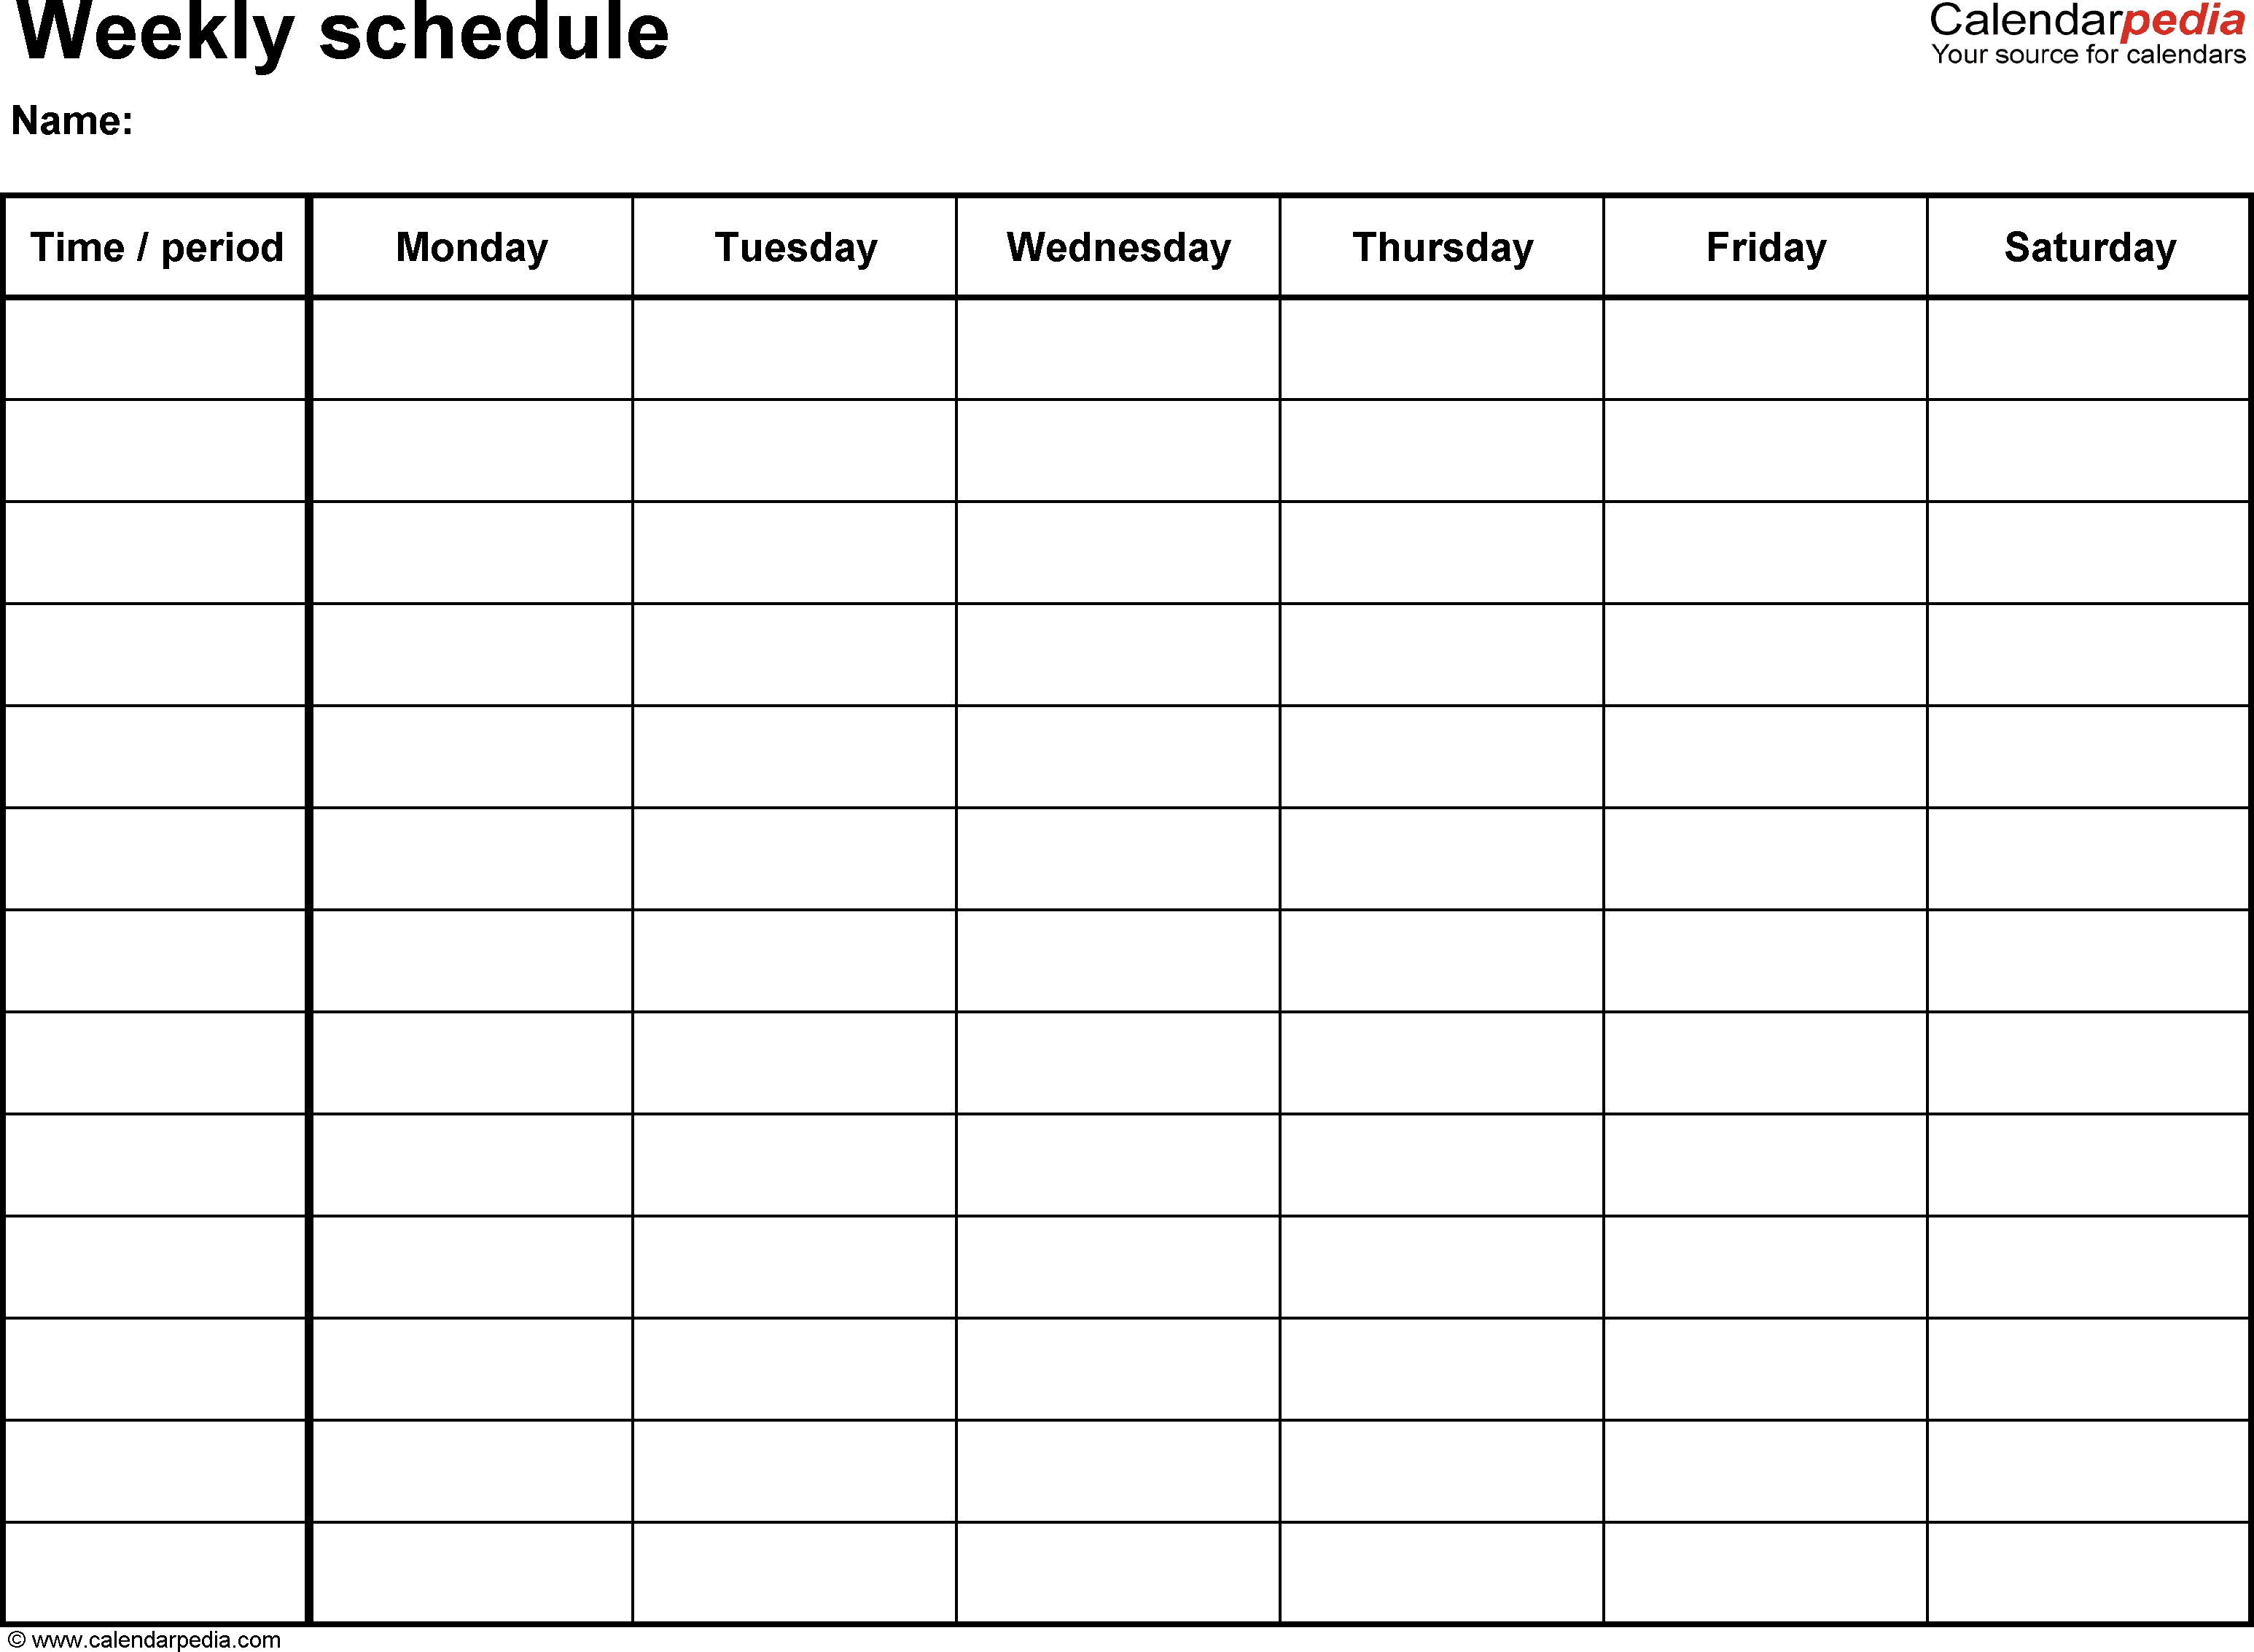 Free Weekly Schedule Templates For Word - 18 Templates within Monday To Friday Schedule Template